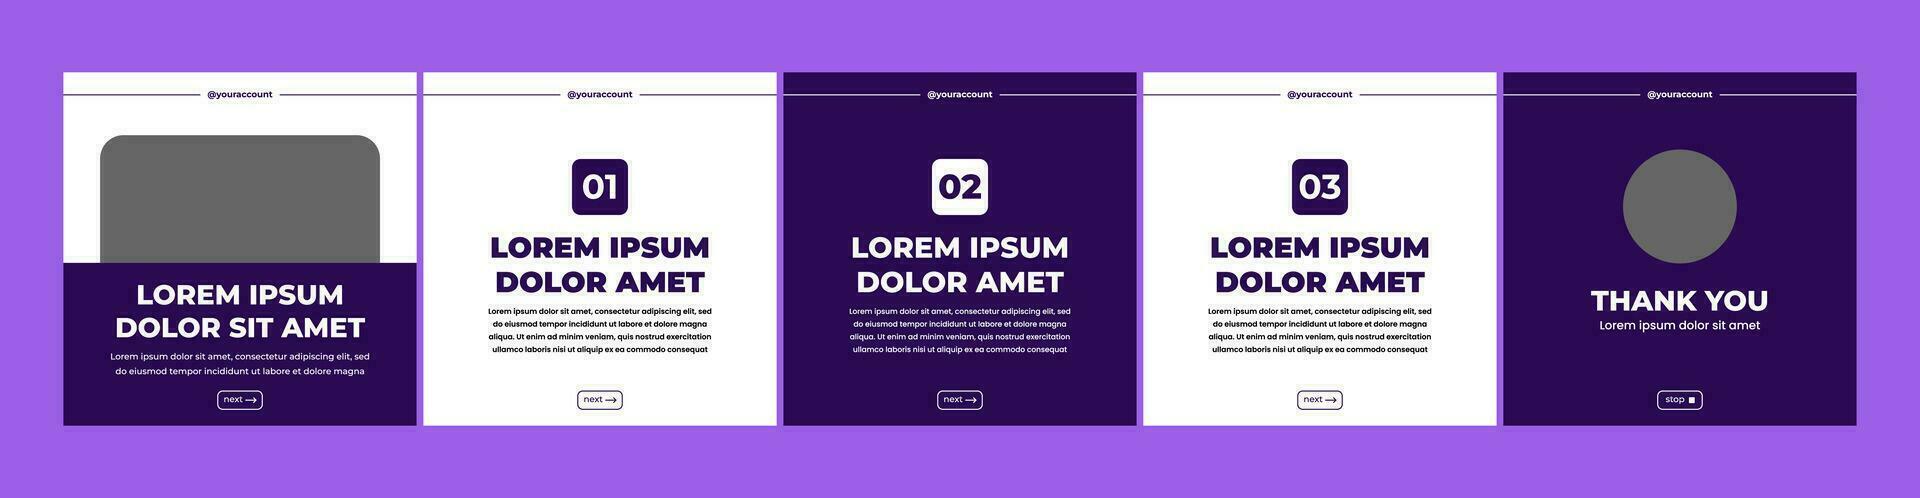 set of creative carousel or microblog templates for social media posts. social media template with purple and white color theme vector